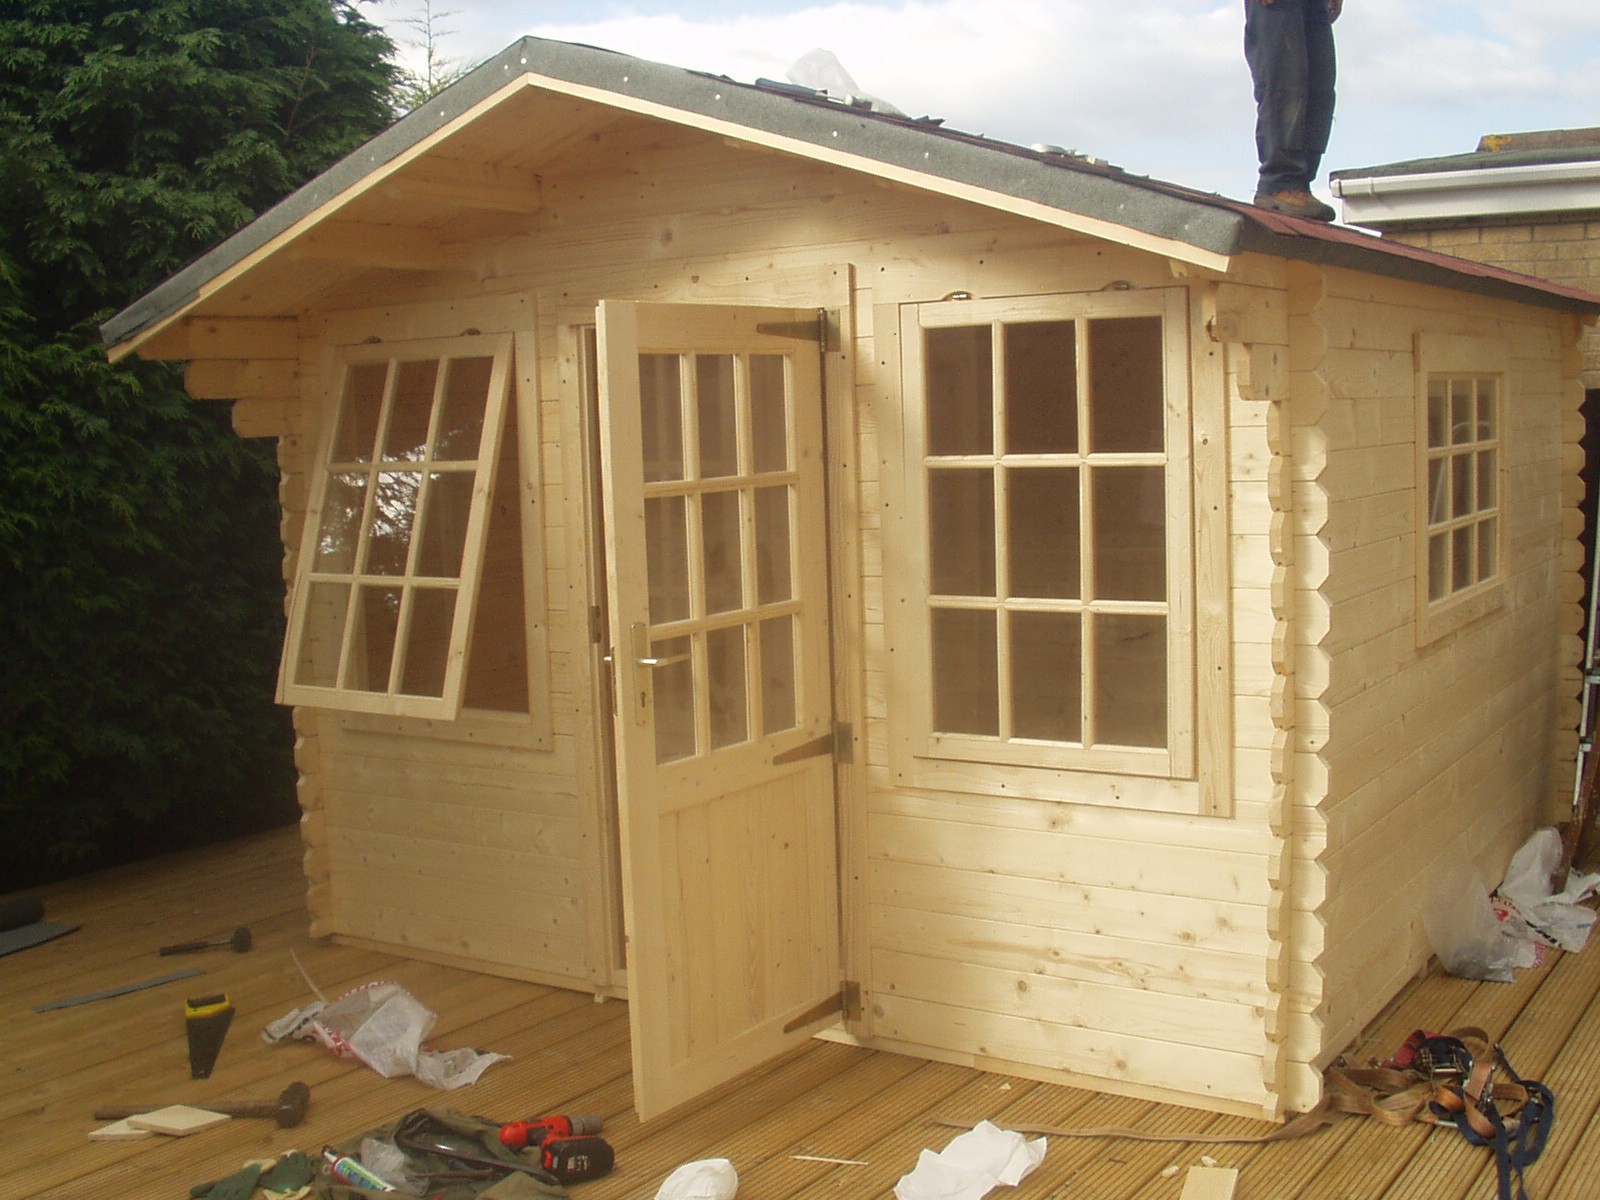 How To Build Your Own Garden Shed Uk | My Woodworking Plans